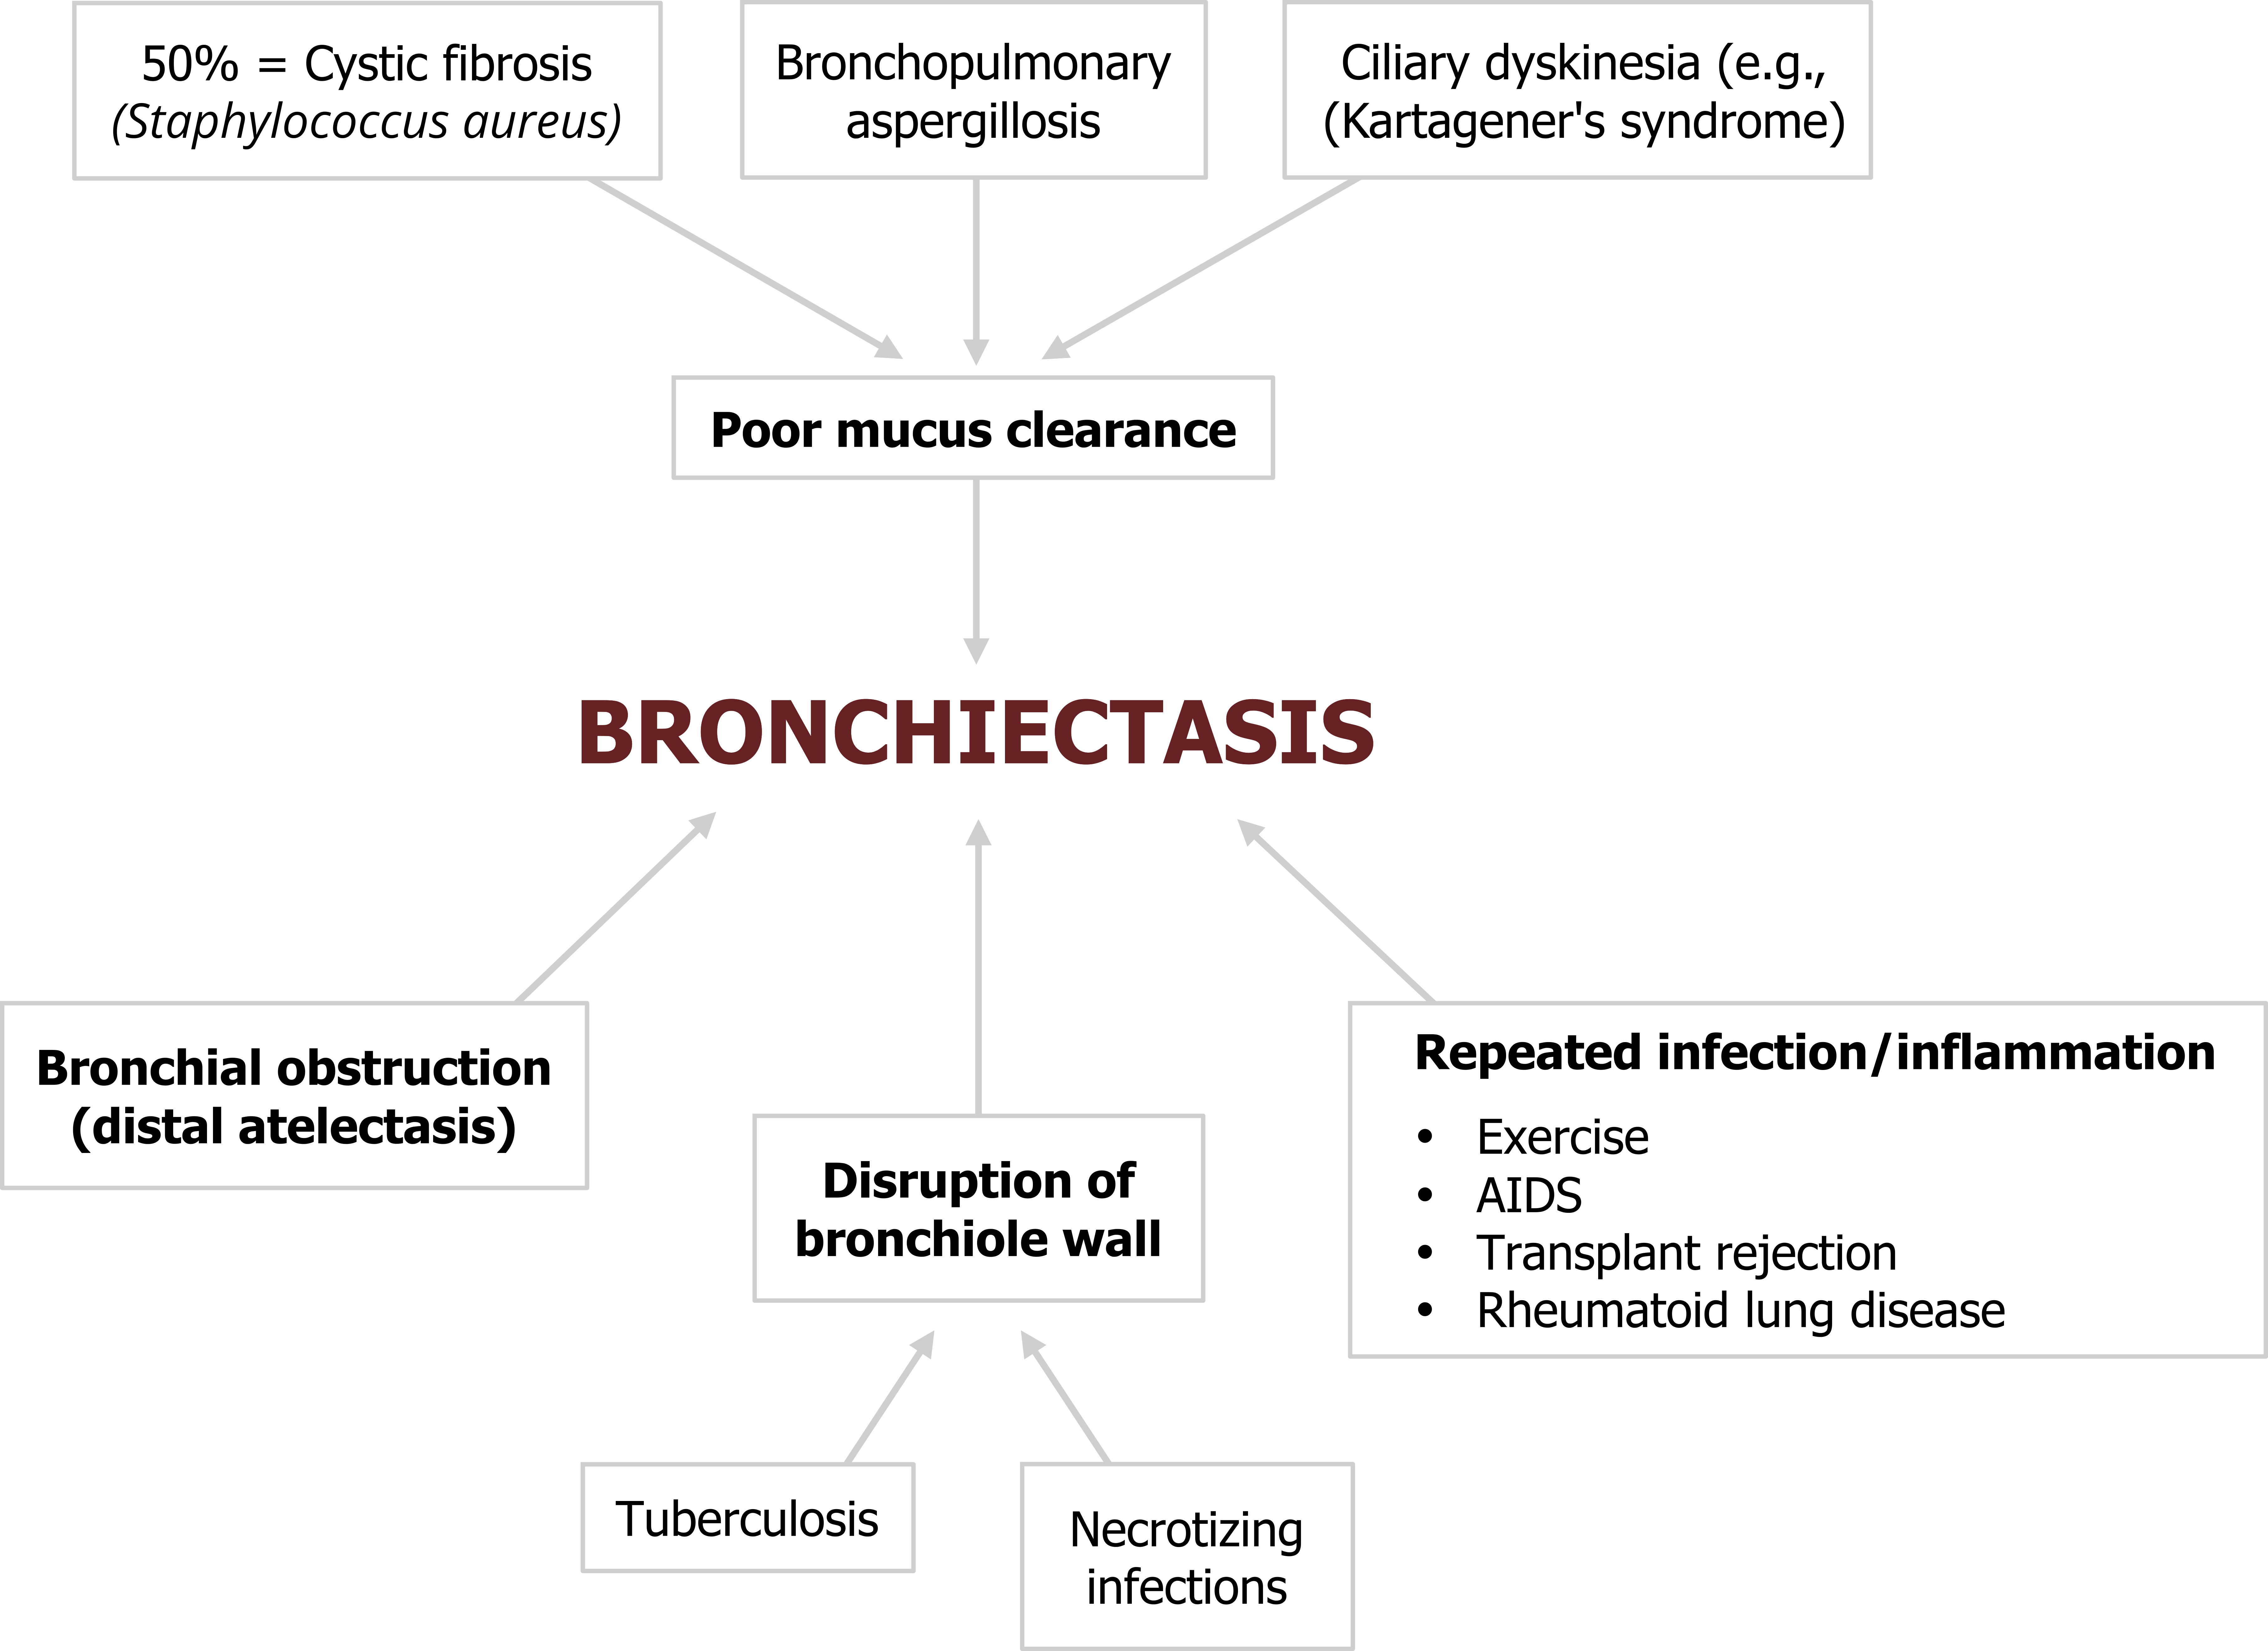 50% = cystic fibrosis (staphylococcus aureus), bronchopulmonary aspergillosis, ciliary dyskinesia (e.g. Kartagener’s Syndrome) arrows to poor mucus clearance arrow to bronchiectasis. Bronchial obstruction (distal atelectasis) arrow to bronchiectasis. Tuberculosis and necrotizing infections arrows to disruption of bronchiole wall arrow to bronchiectasis. Box titled repeated infection / inflammation with bullets exercise, AIDS, transplant rejection, rheumatoid lung disease arrow from box to bronchiectasis.